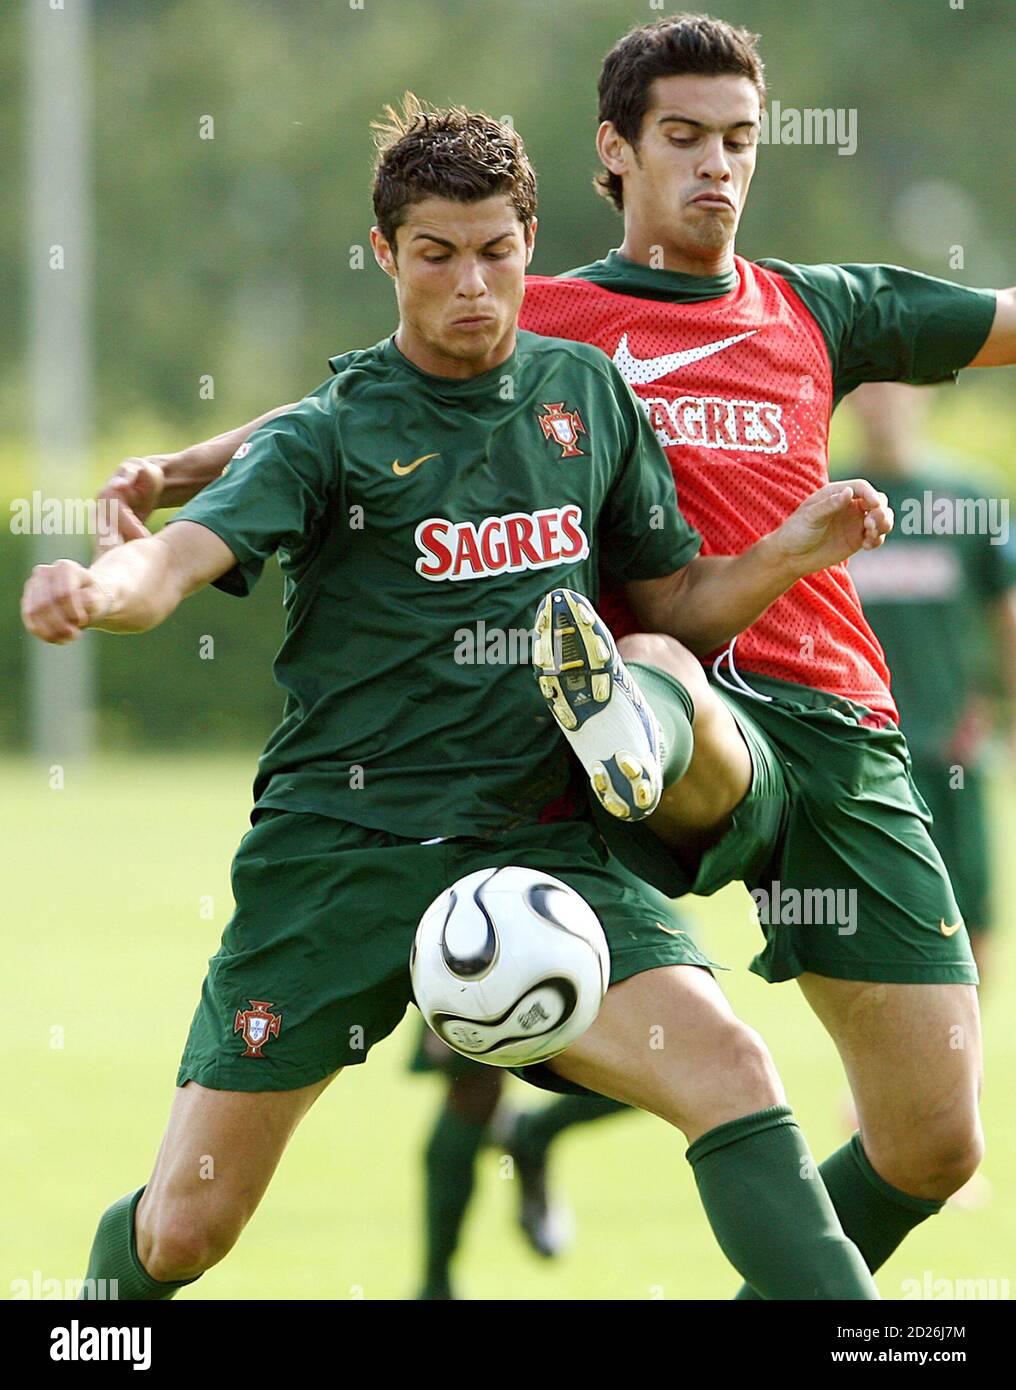 PHOTO TAKEN 07JUN06- Portugal's national soccer player Cristiano Ronaldo  (L) and Ricardo Costa (R), both wearing Nike apparel, battle for the ball  during a training session in Marienfeld, northwest Germany, June 7,